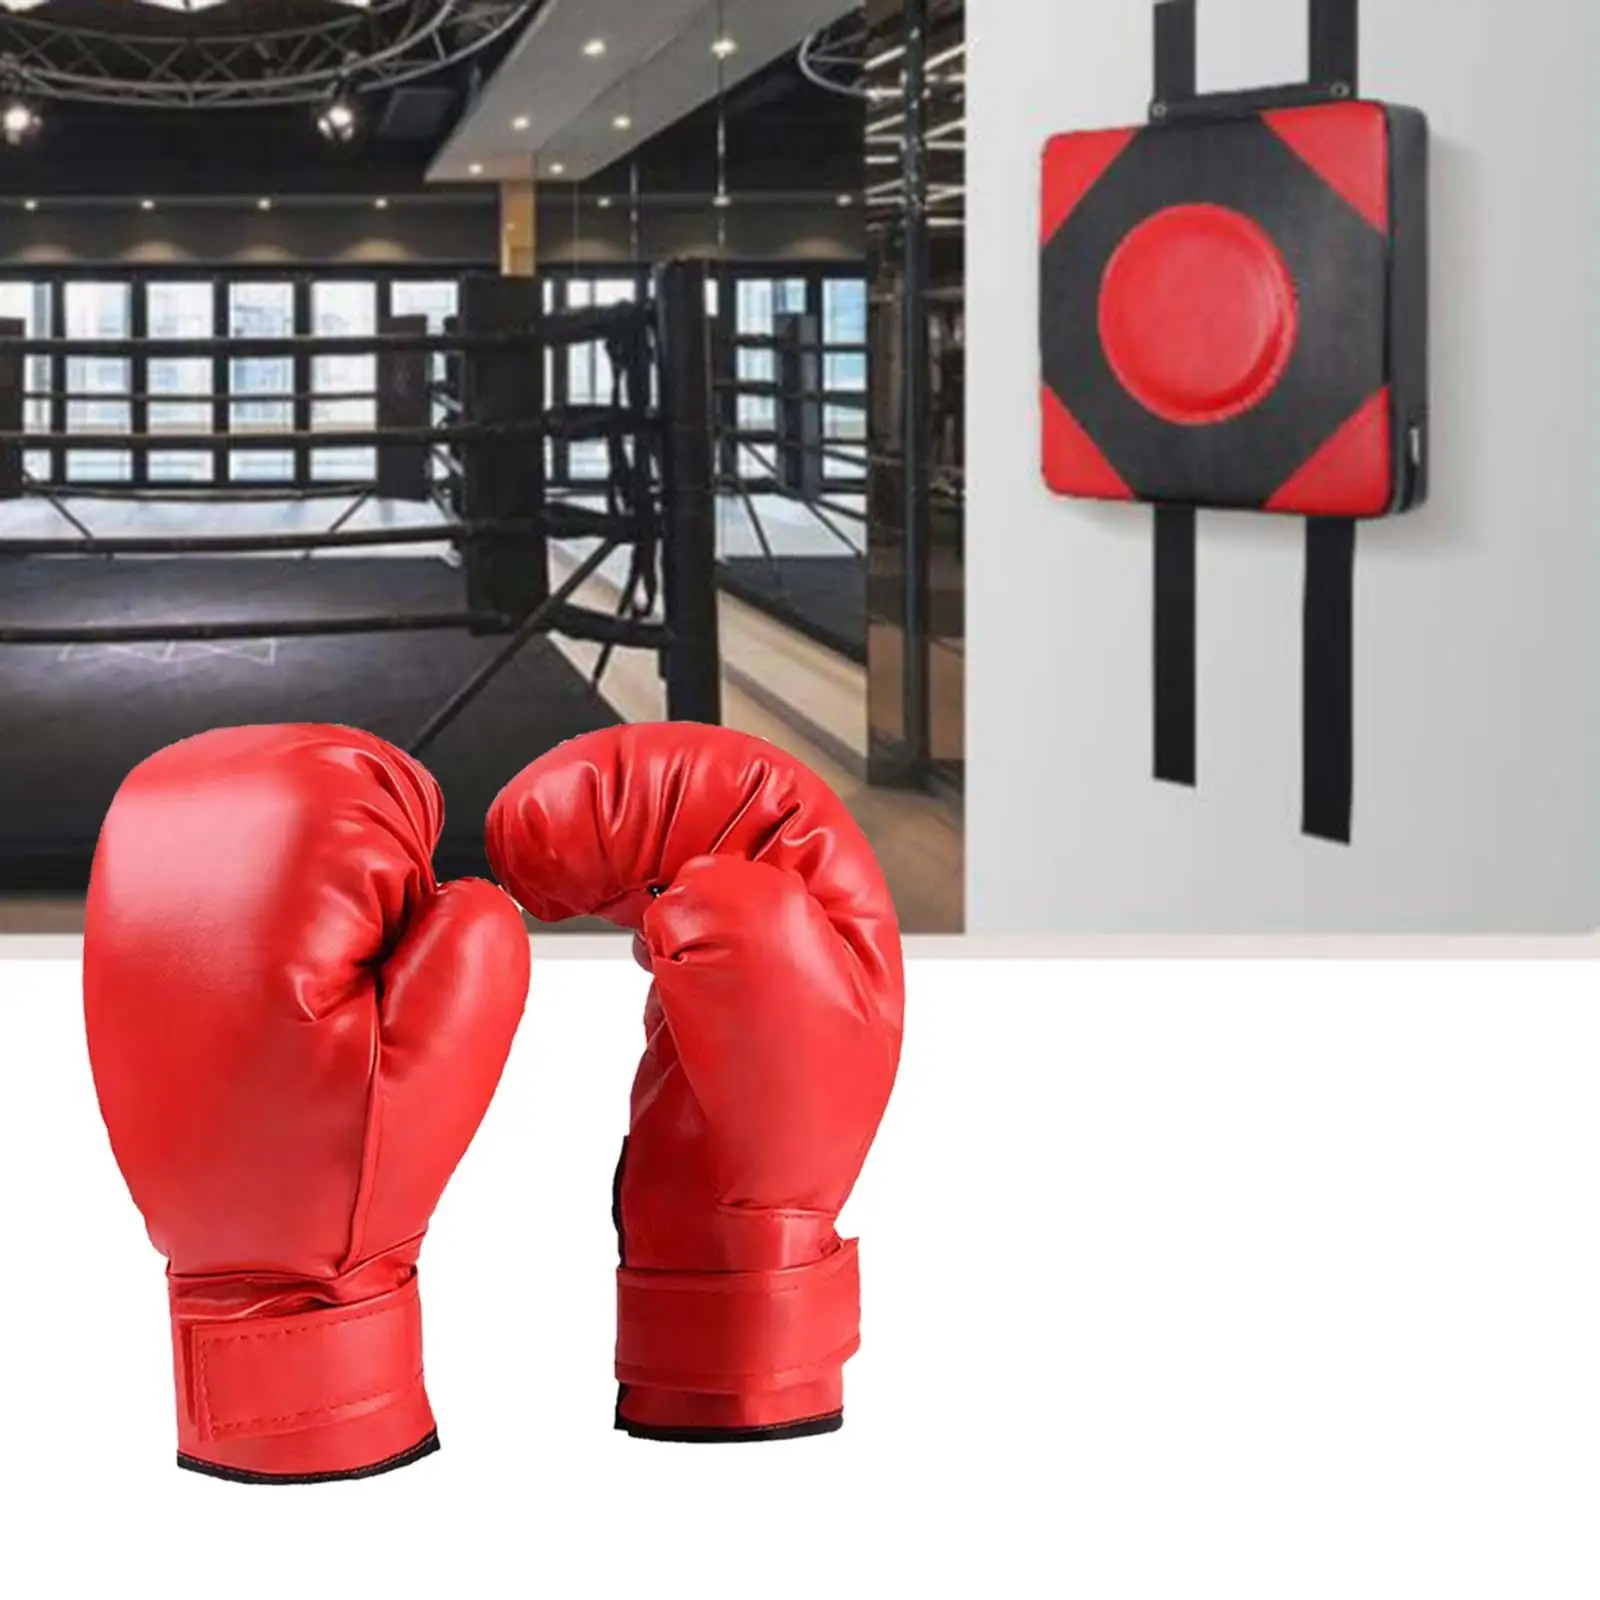 Boxing Wall Target Focus Target with Gloves Strike Fighting Pad Wall Punching Pad Boxing Trainer for Exercise Gym Home